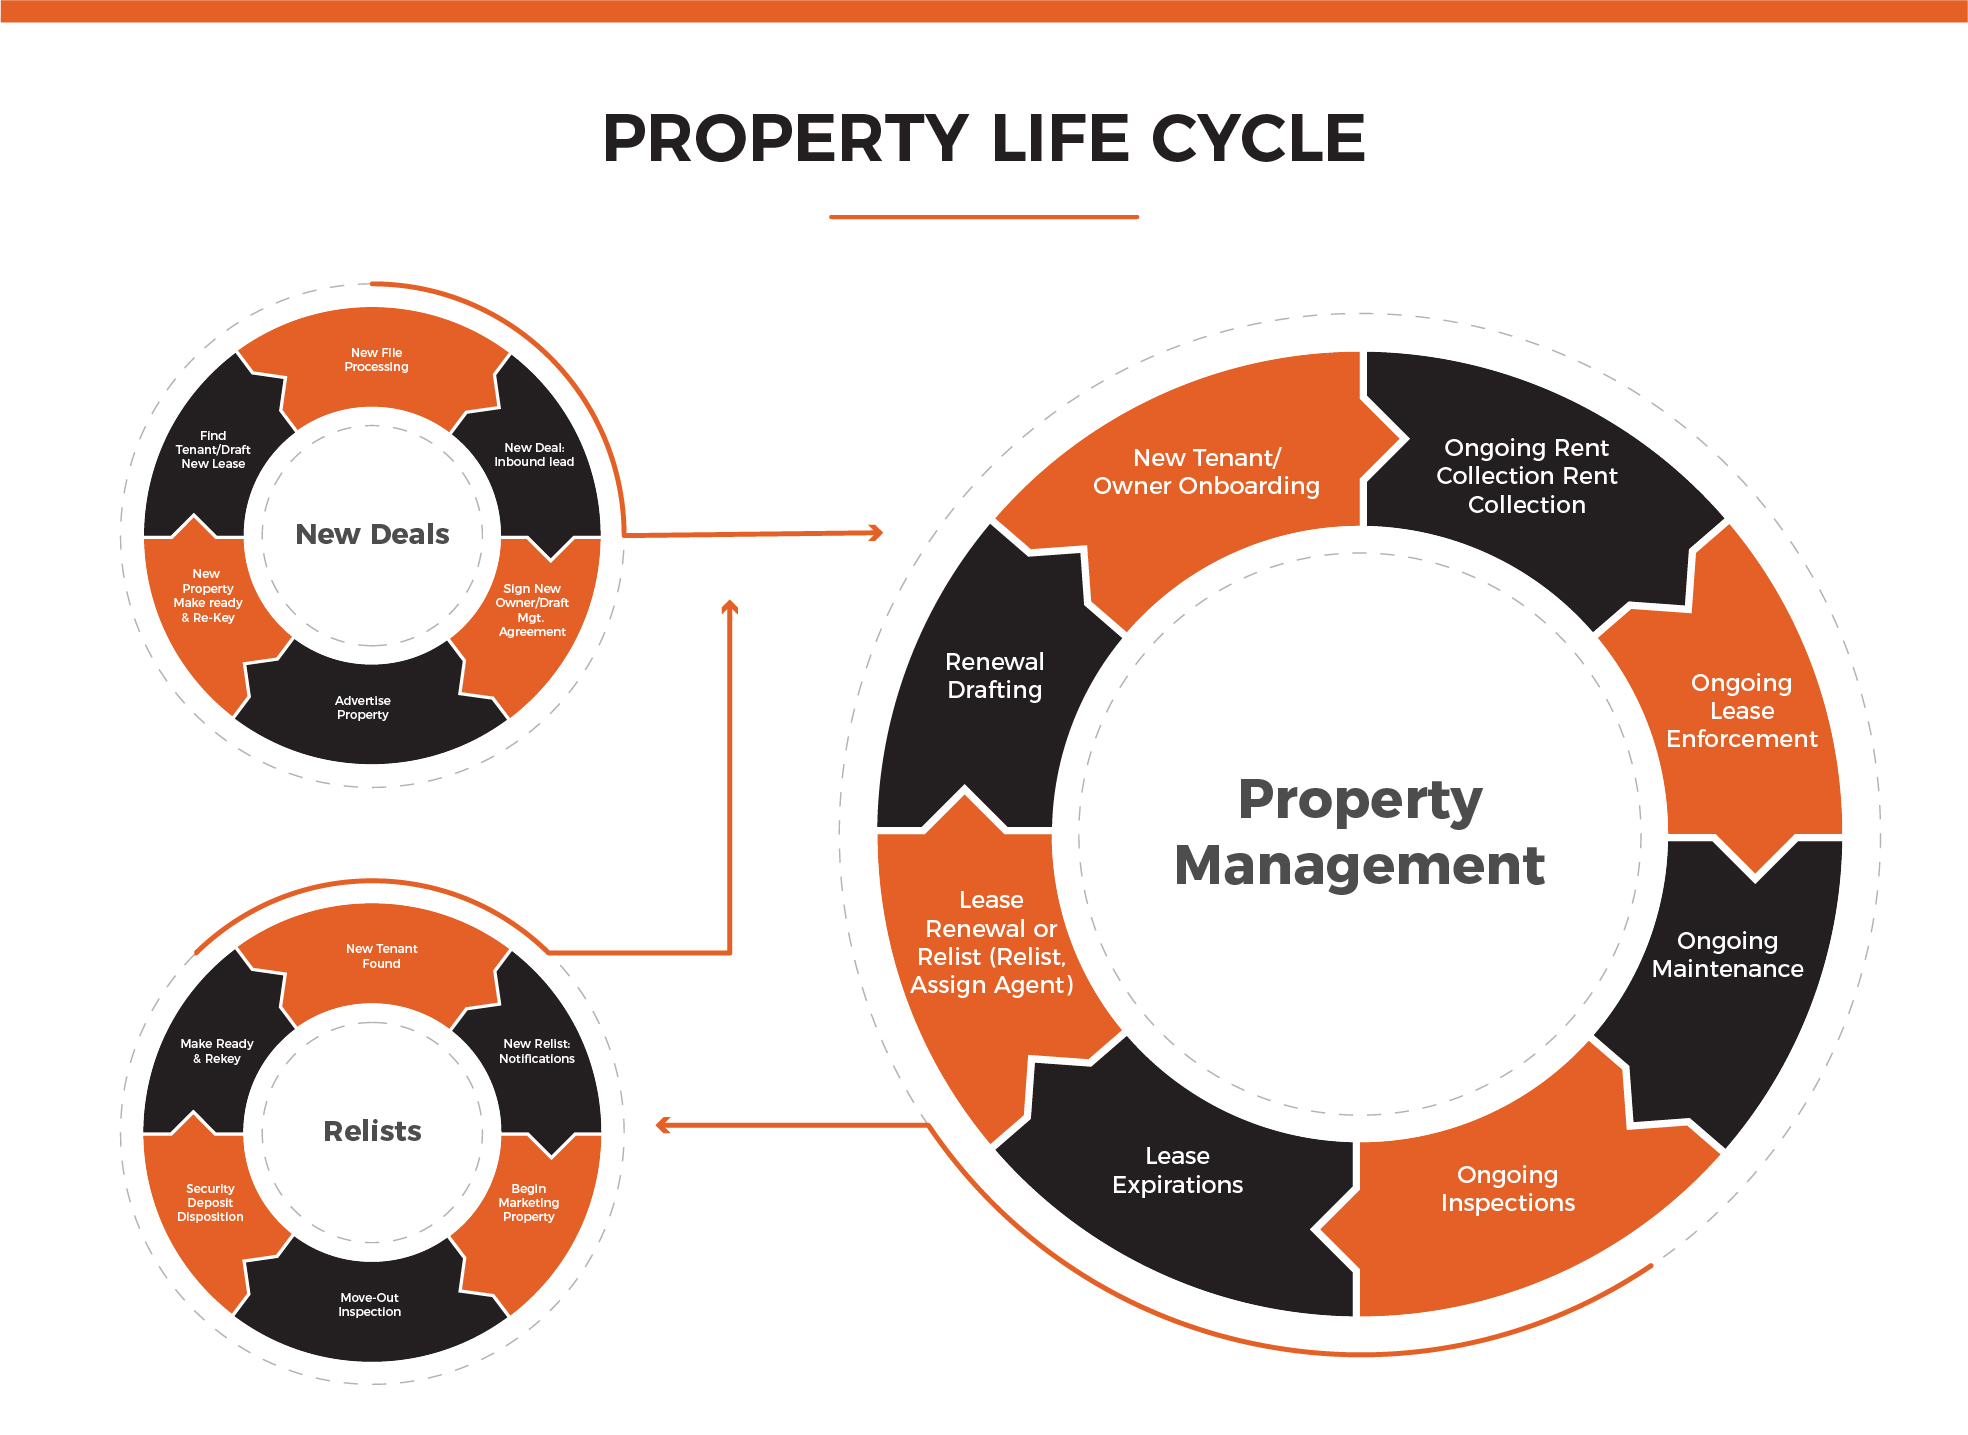 The Lifecycle of a Property Under Management